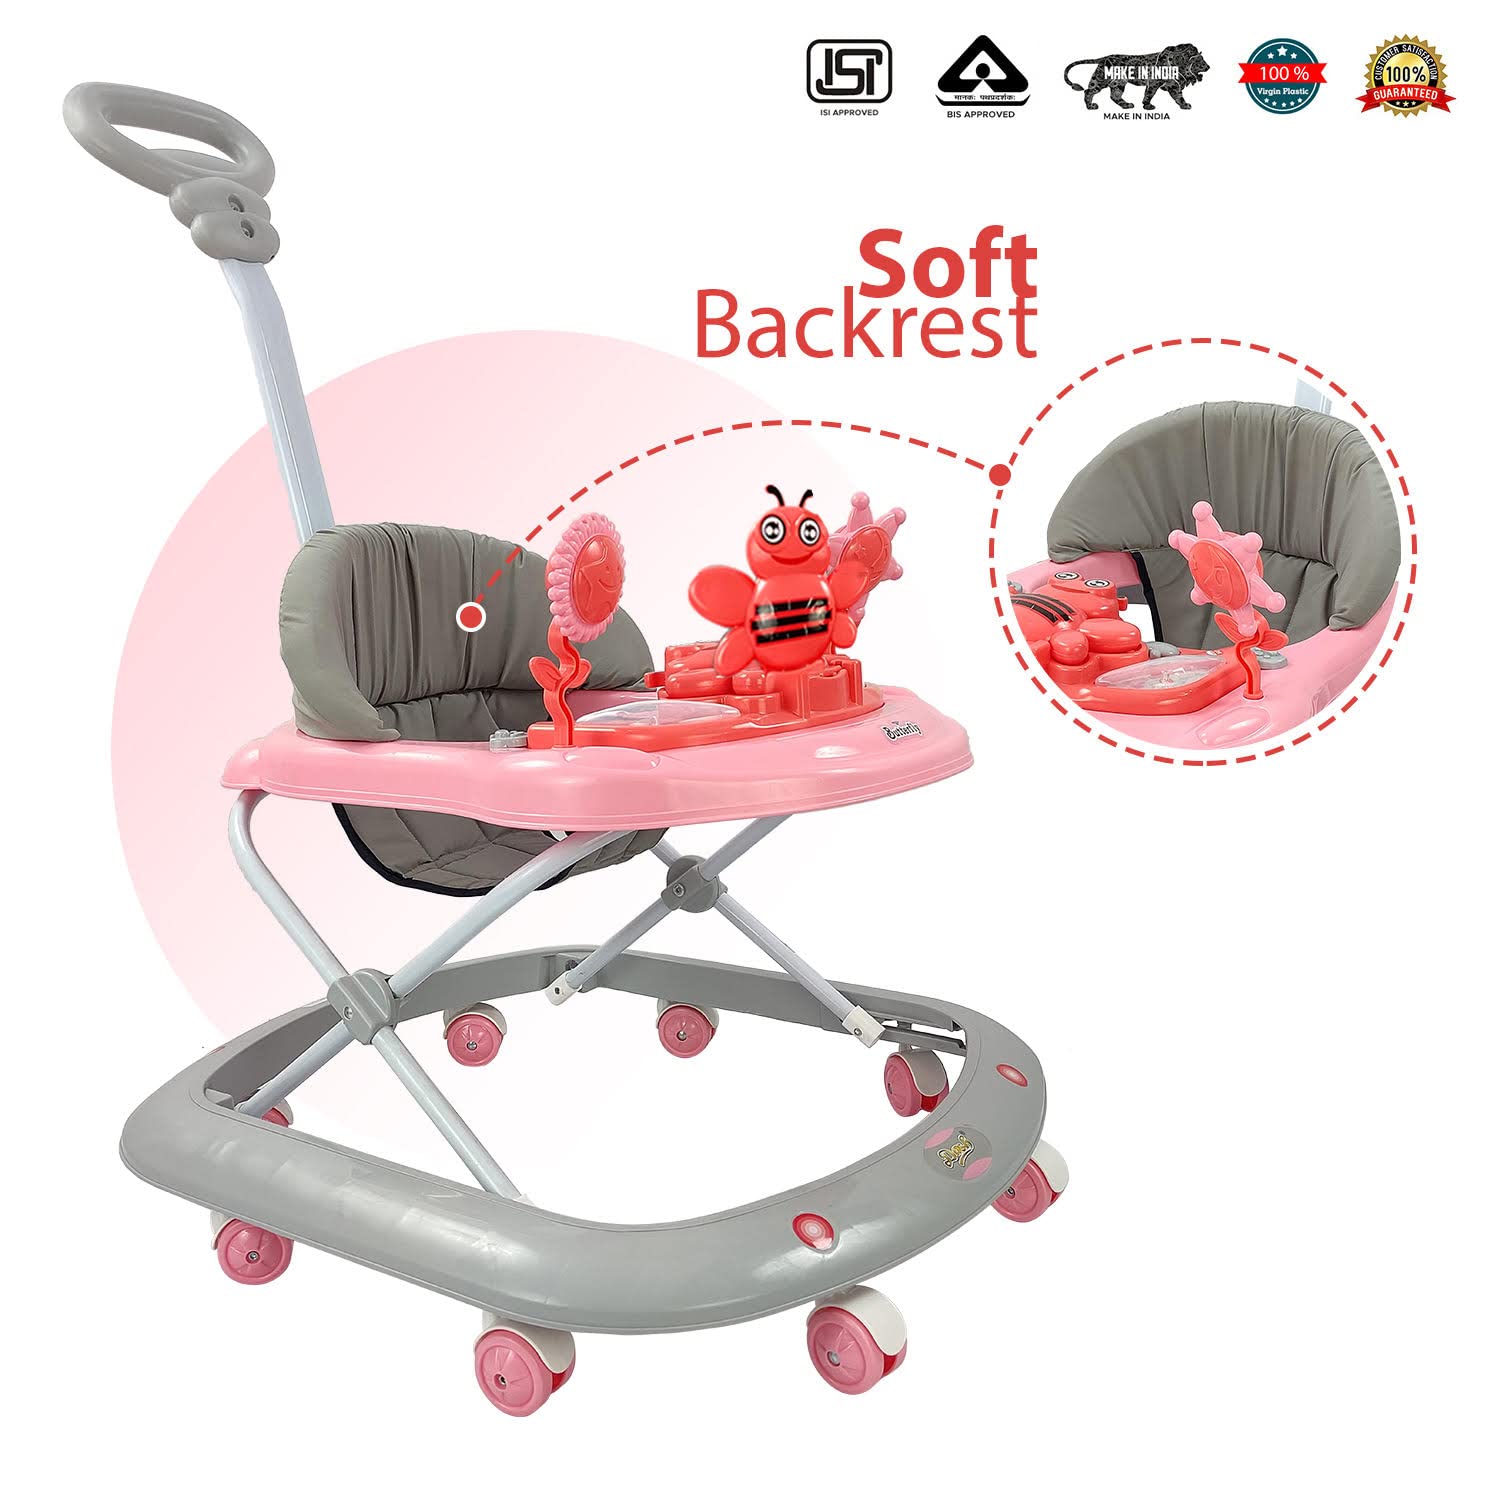 Butterfly Deluxe Baby Walker with 3 Position Adjustable Height Music & Light & Parental Handle, Foldable Activity Walker, Baby 6-18 Months boy, Walker for Kids (Capacity 20kg | Pink)